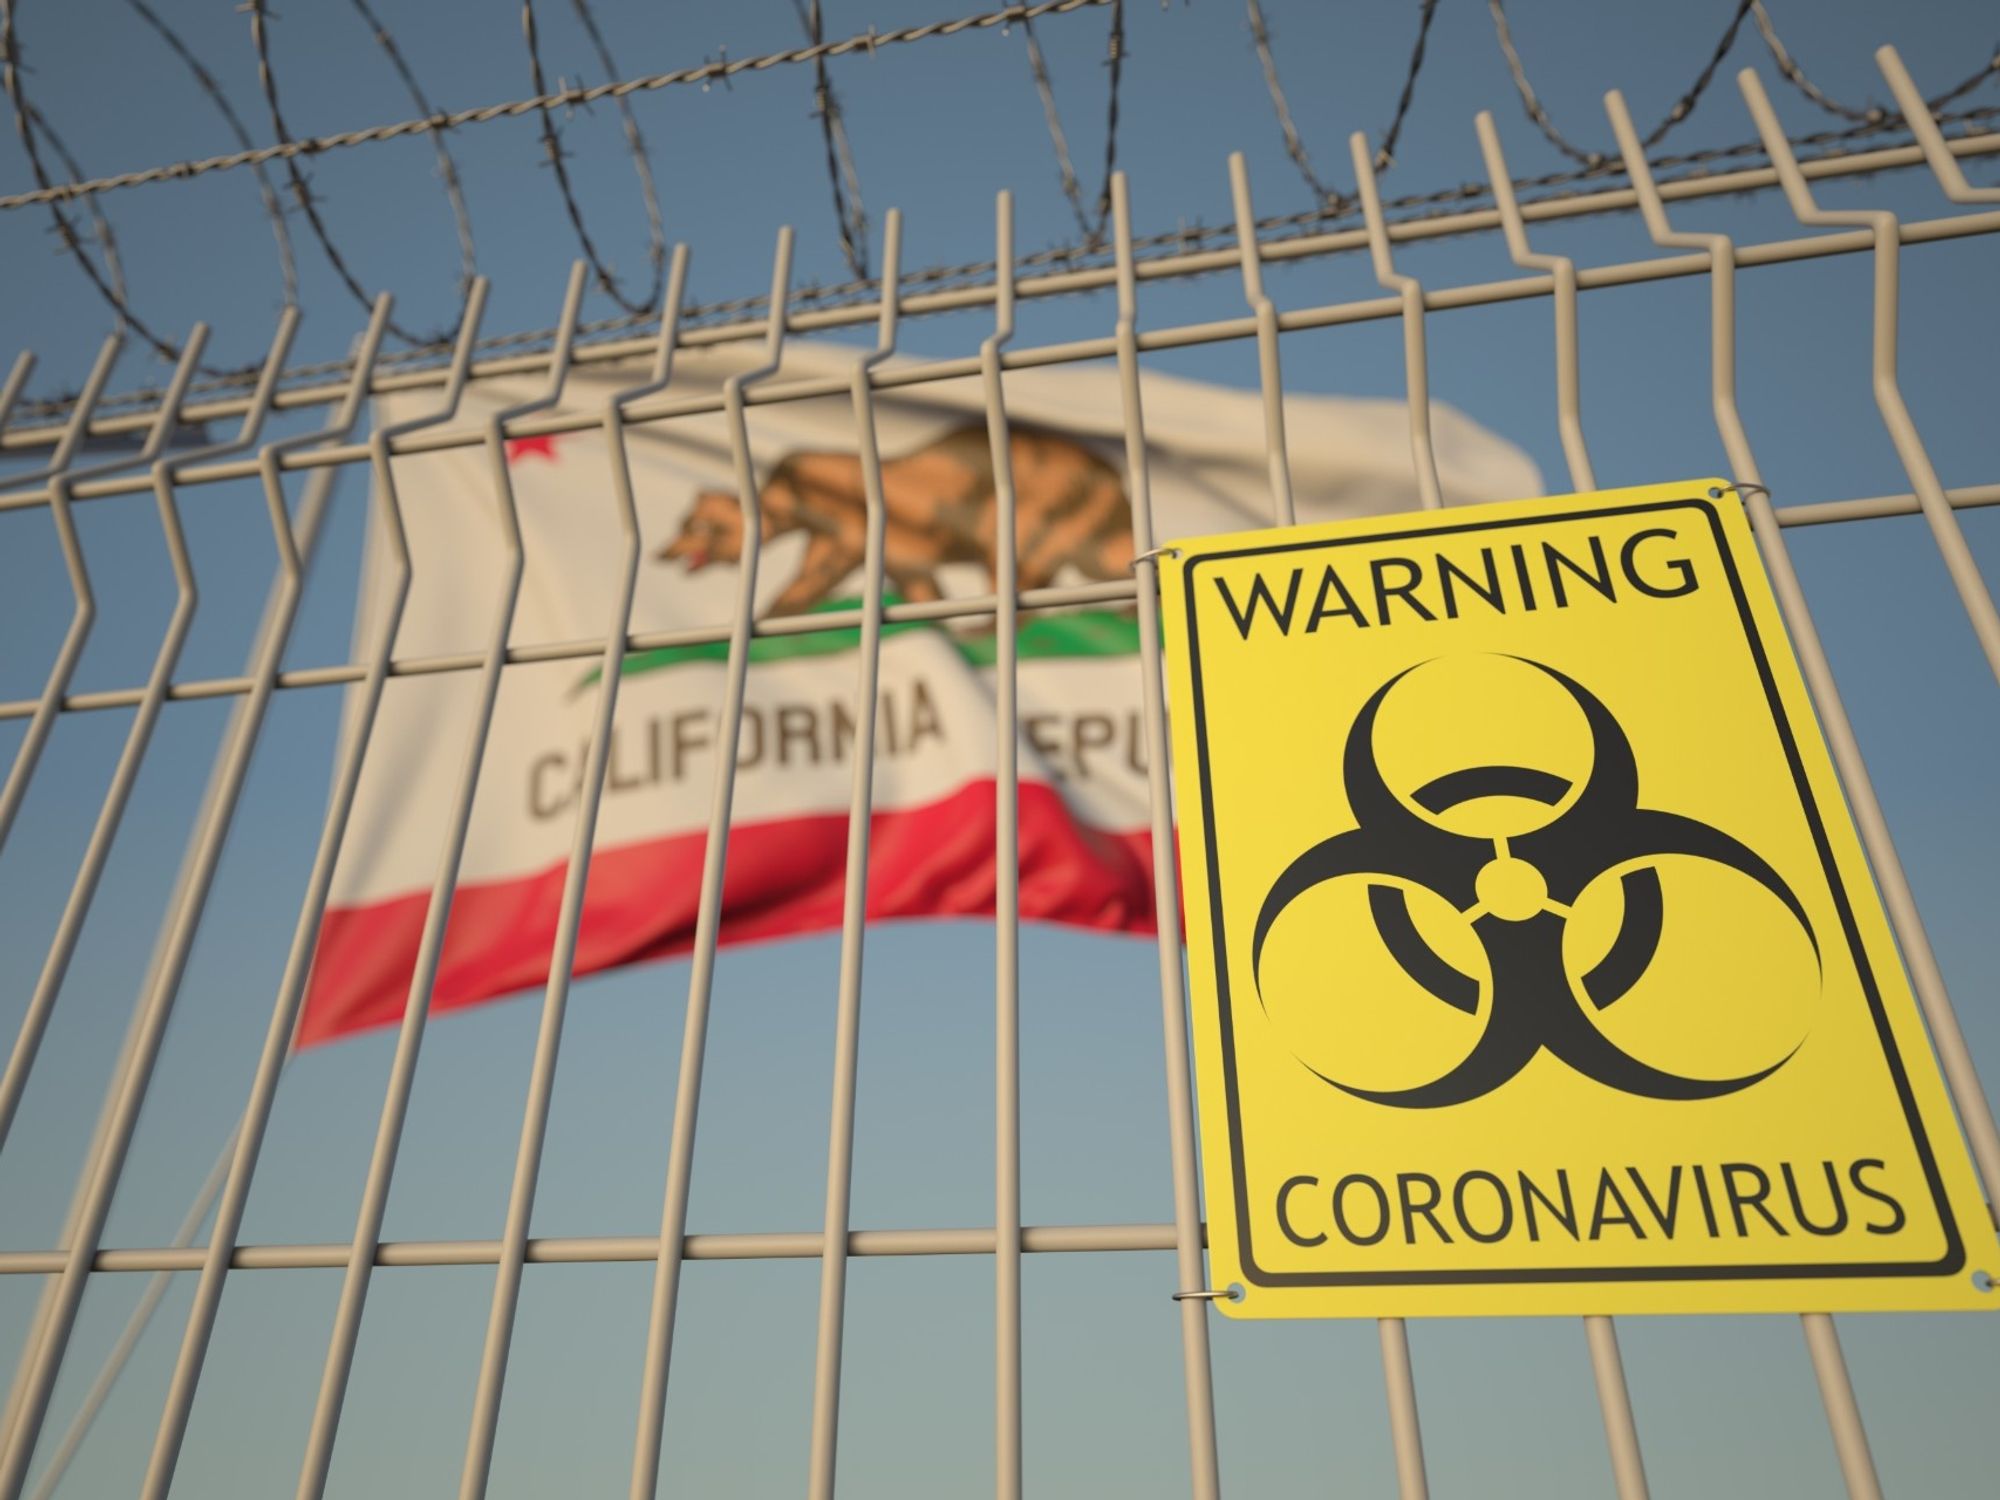 Coronavirus Updates: Quibi's Possible Ad Woes; Warner's IPO Hopes; Disney Plans to Open Florida Theme Park